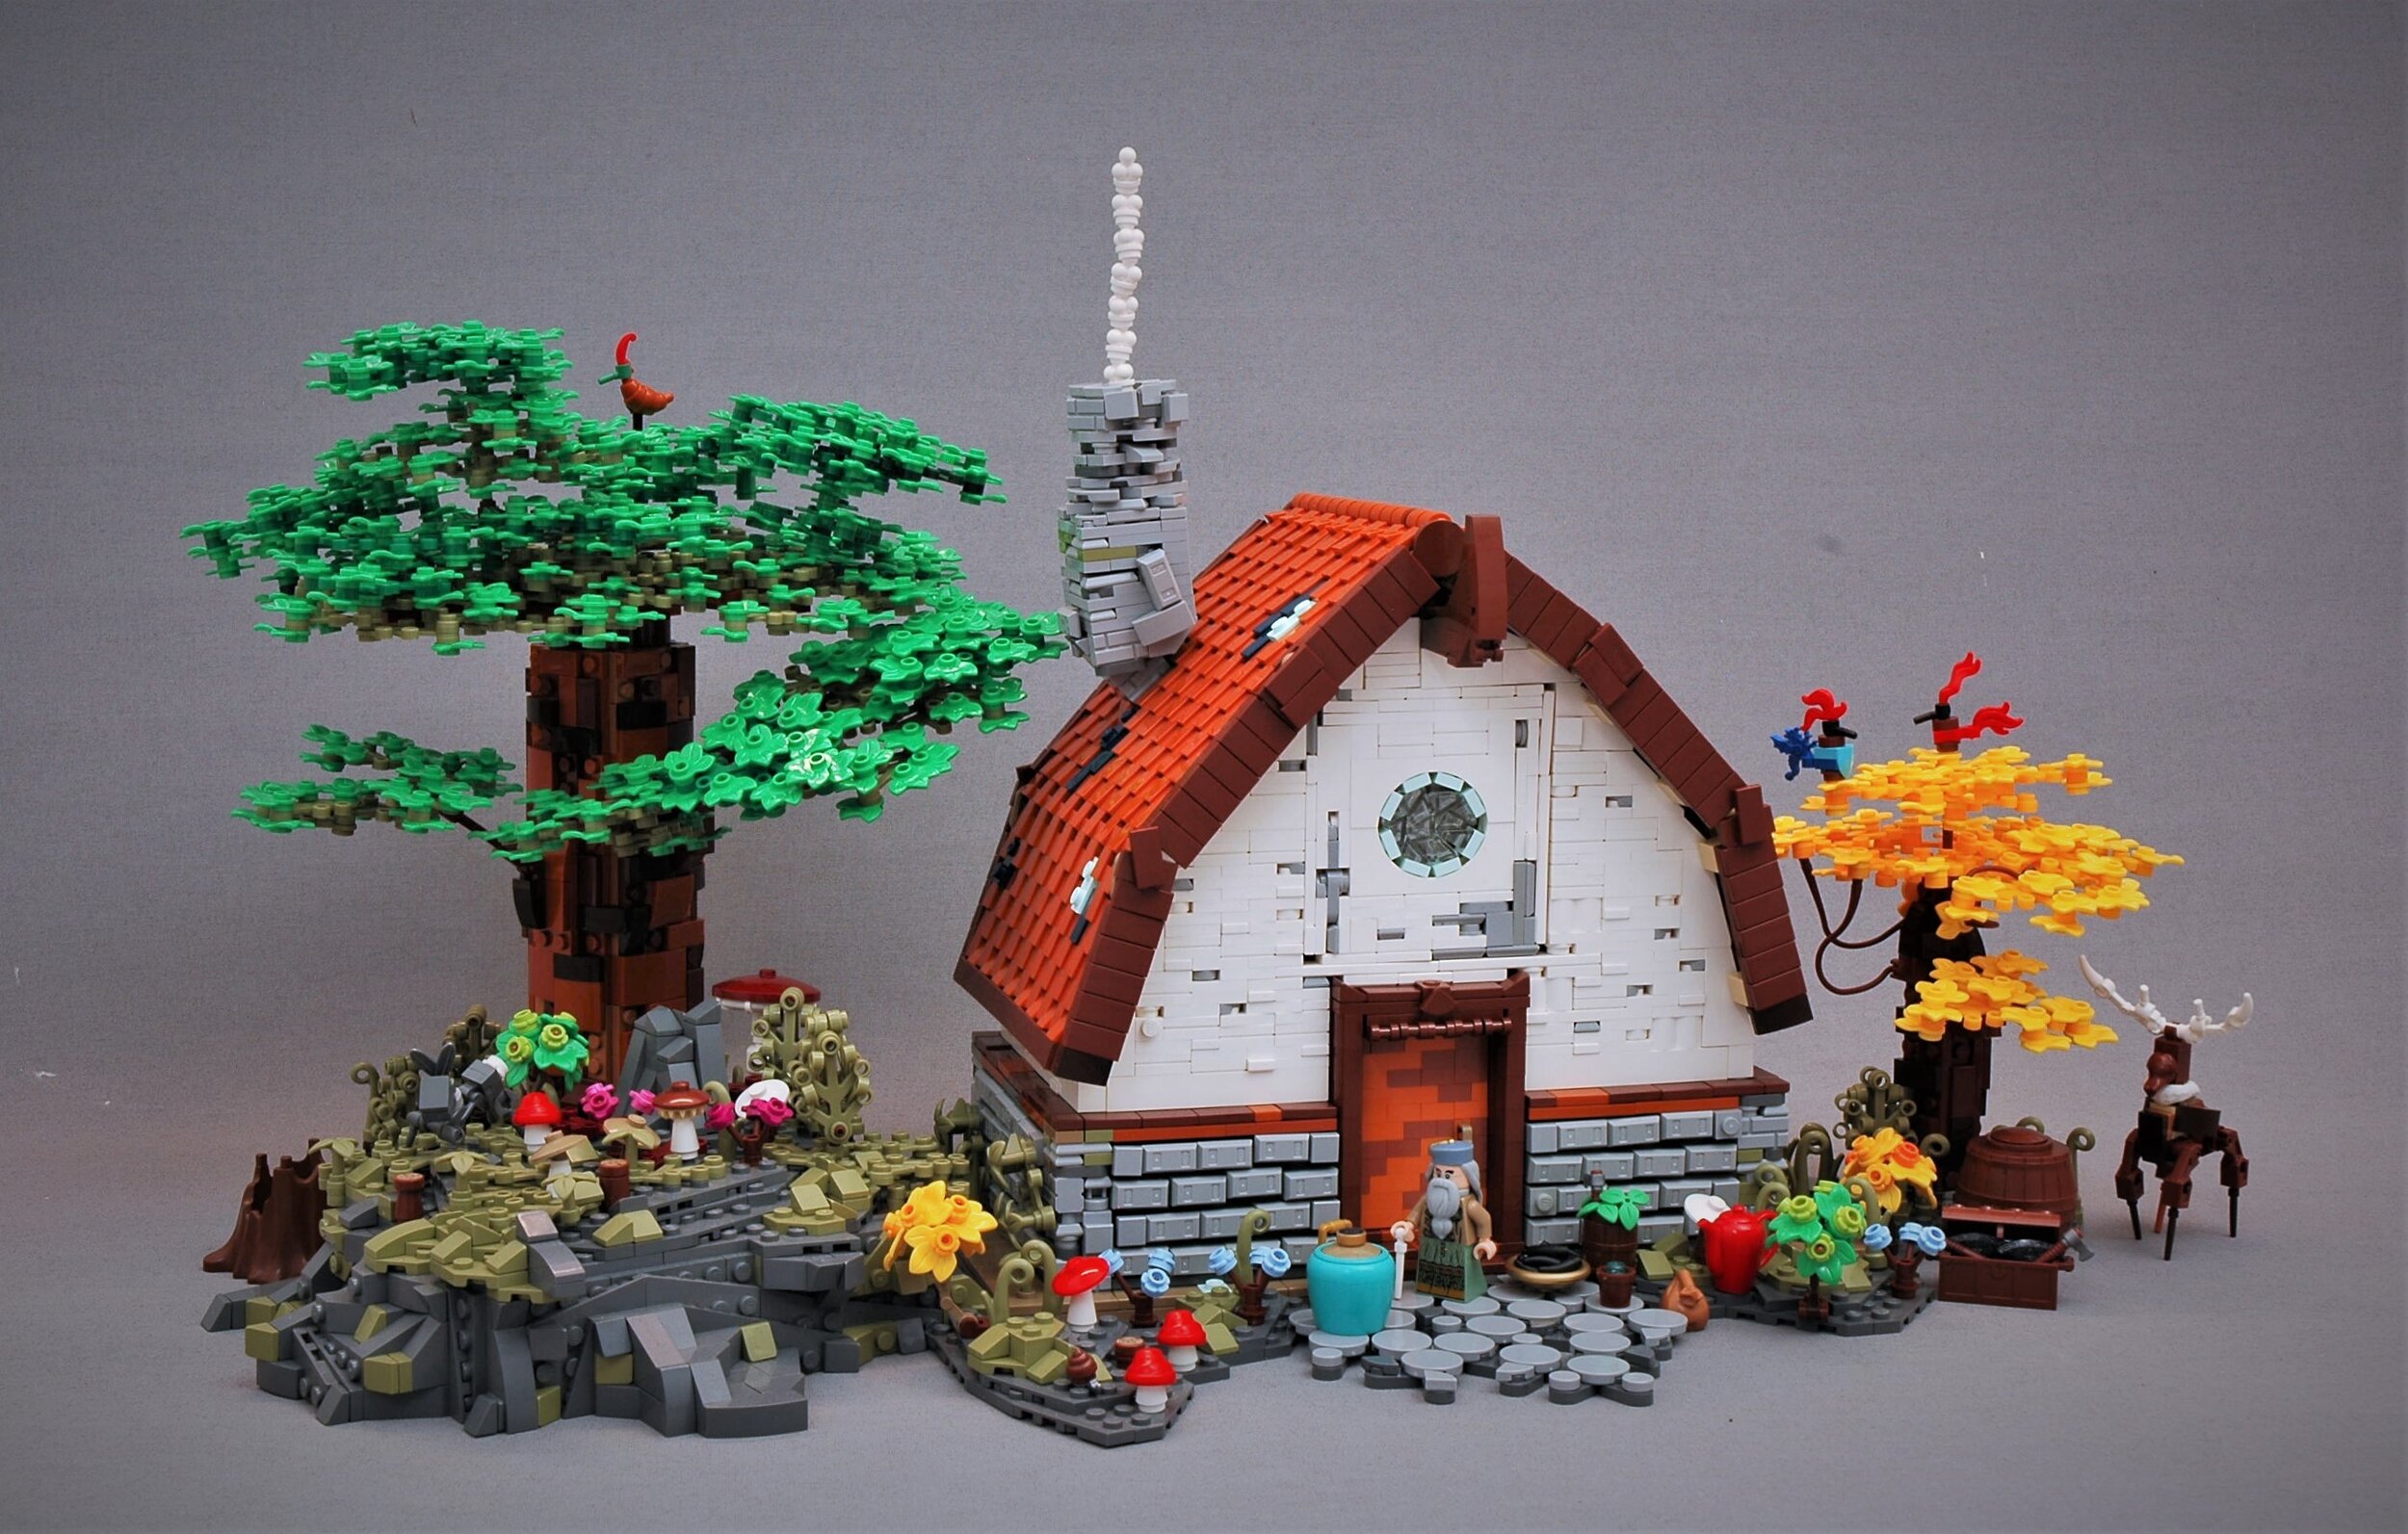 Puno exposition swap How to Build a LEGO Cottage in the Most Illegal Way Possible - BrickNerd -  All things LEGO and the LEGO fan community